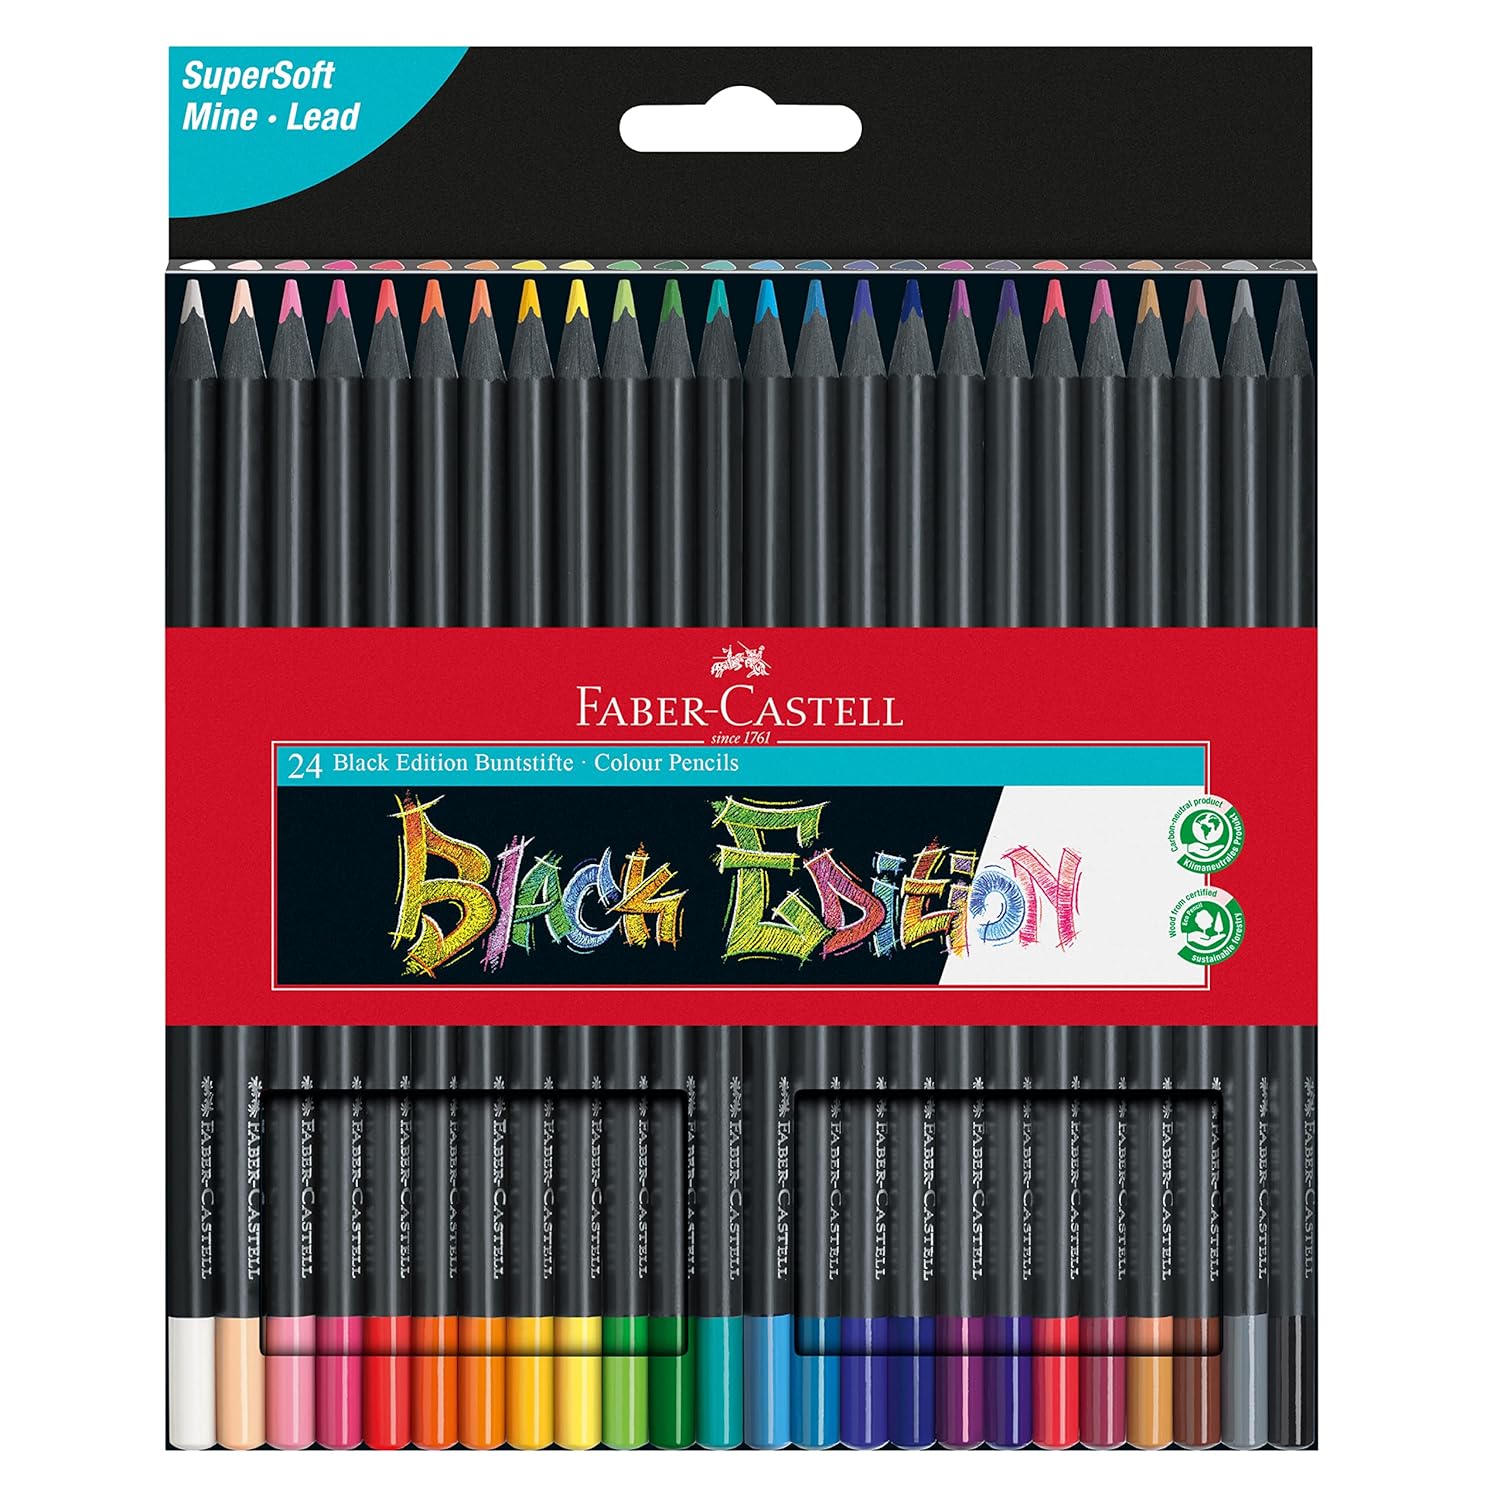 Faber-Castell Black Edition Colored Pencils - 24 Count, Black Wood and Super Soft Core Lead